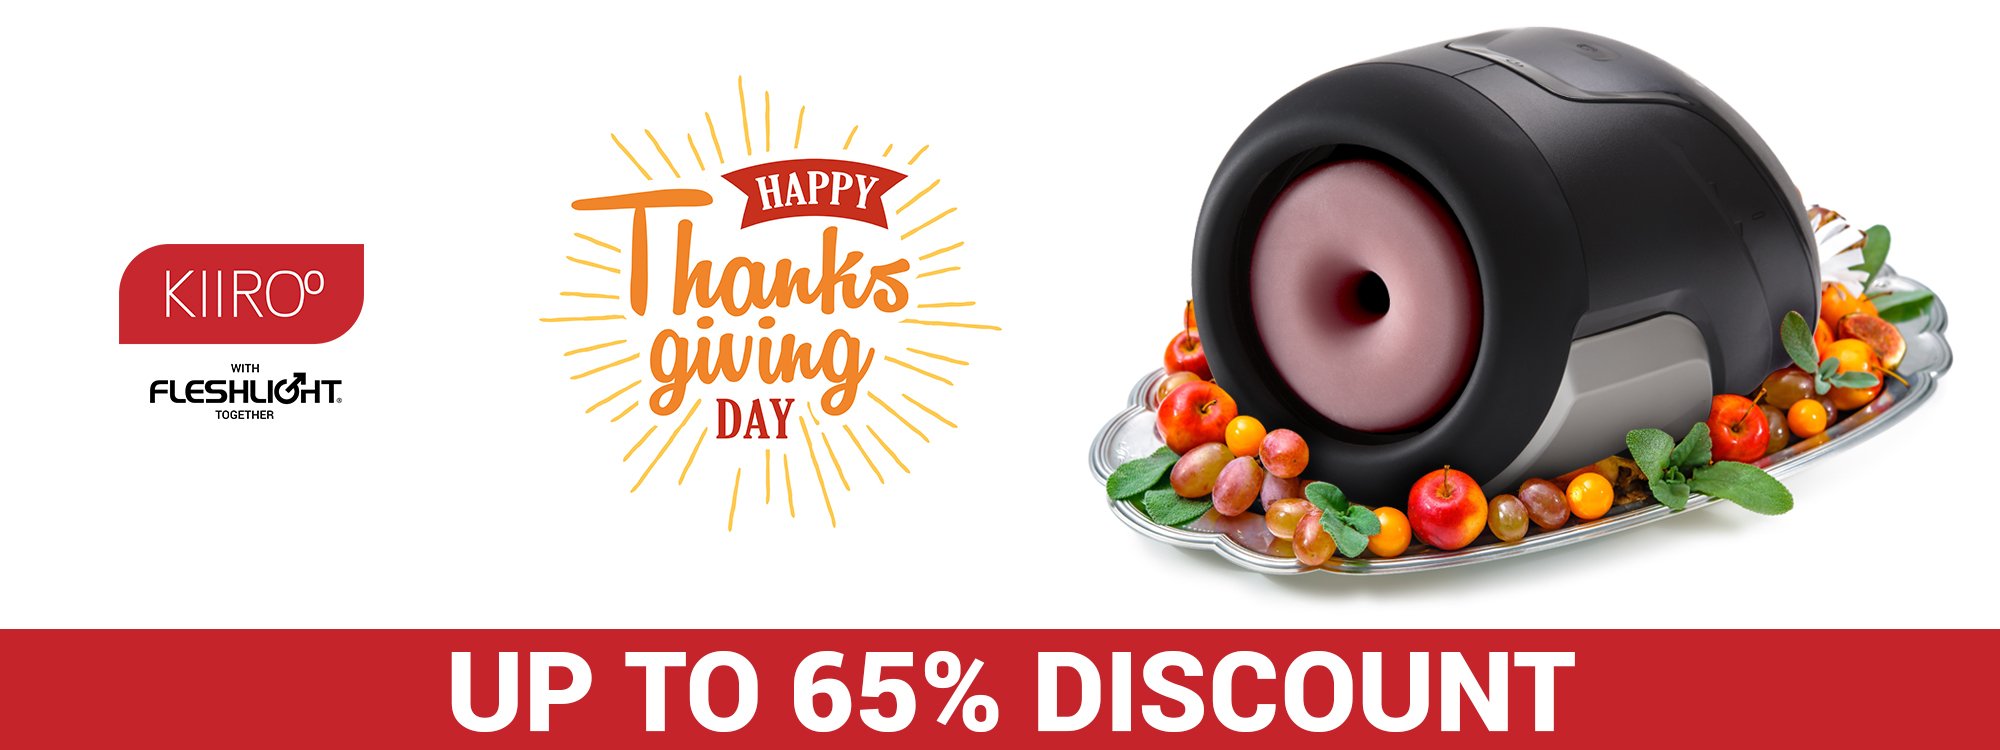 Black Friday Deals and Sales from Kiiroo